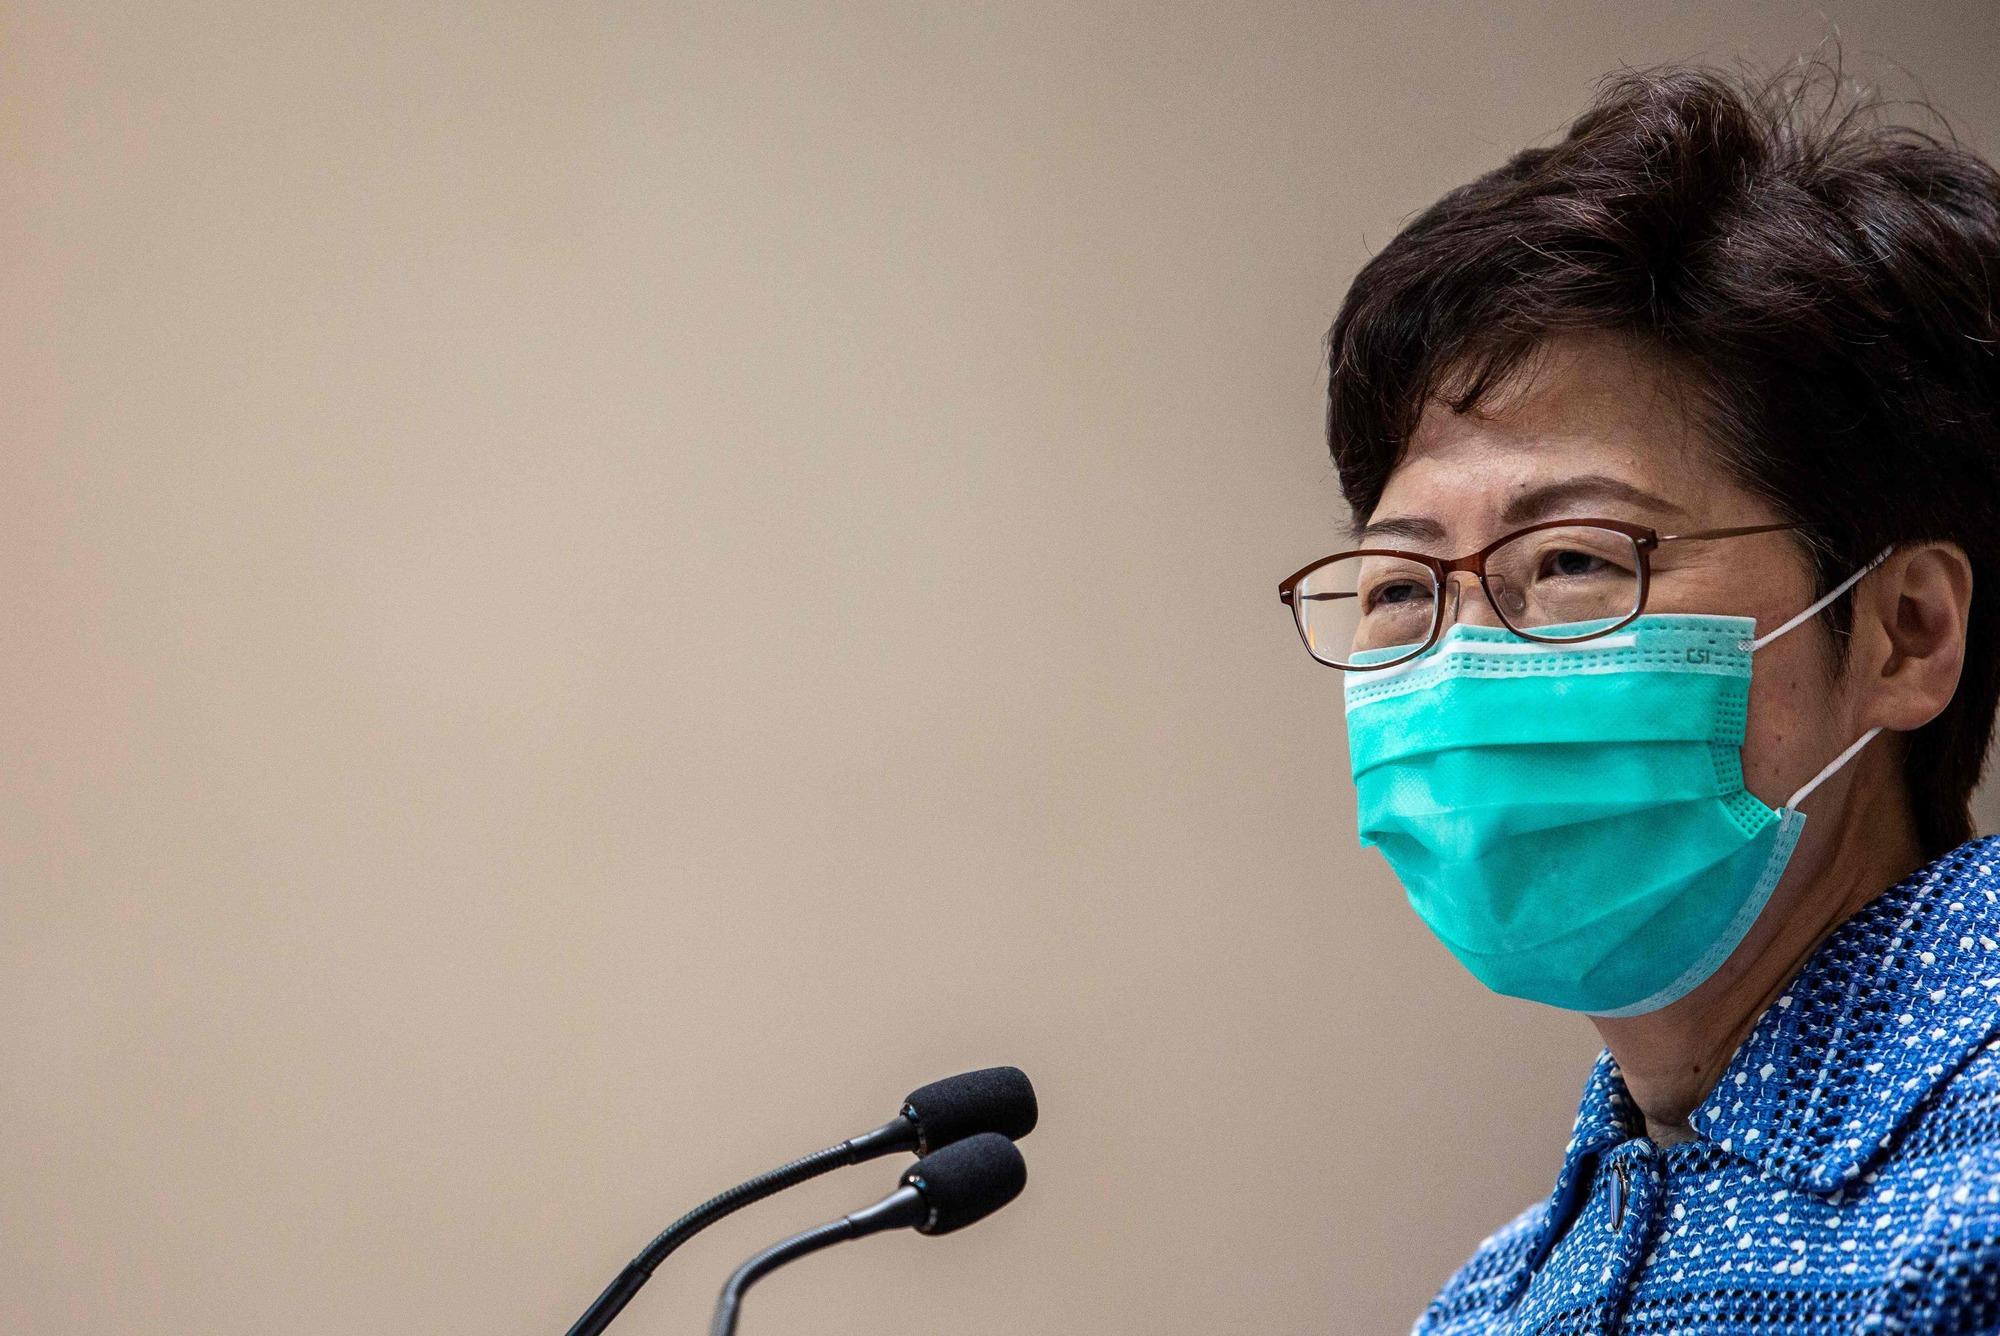 Hong Kong's Chief Executive Carrie Lam takes part in a press conference while wearing a face mask in Hong Kong on March 3, 2020. (Photo by ISAAC LAWRENCE / AFP)